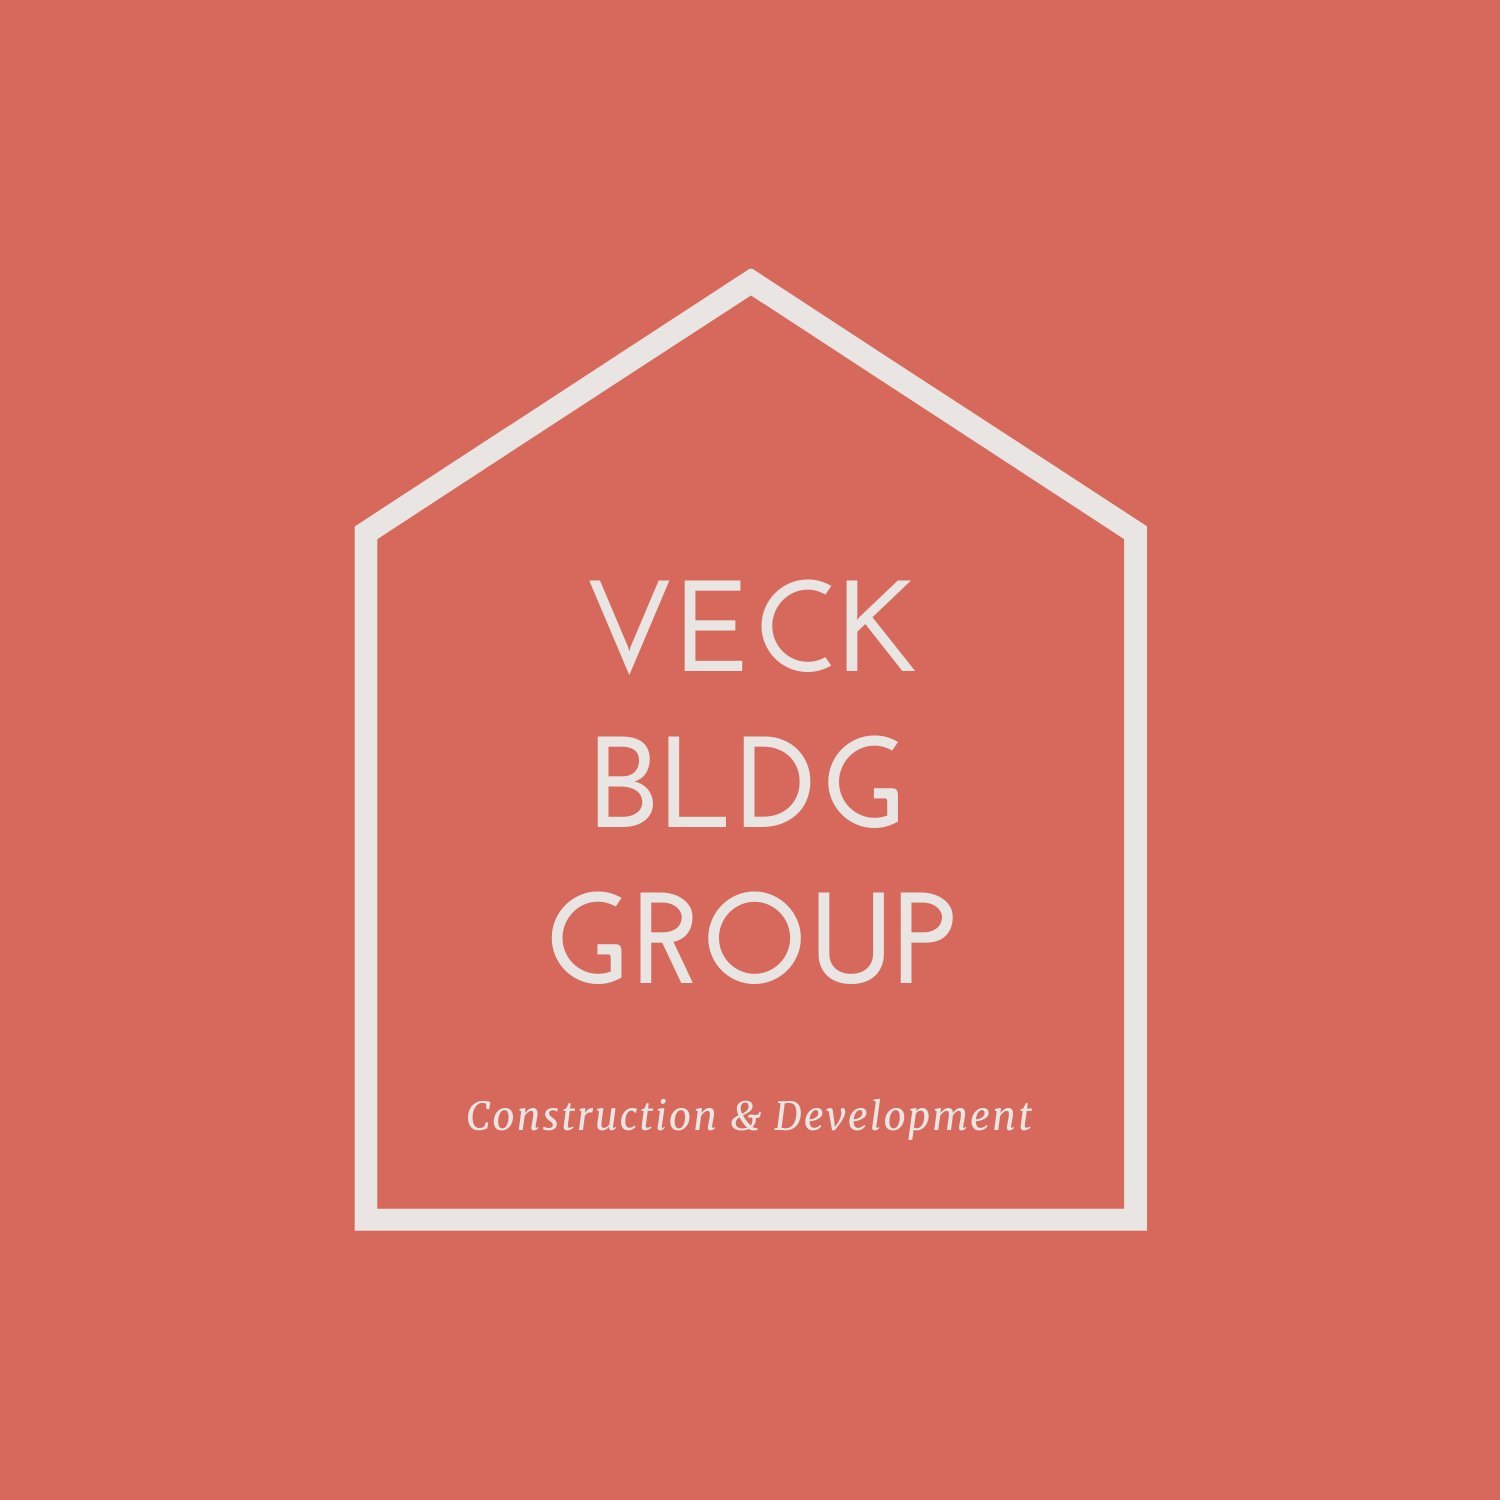 Veck Building Group